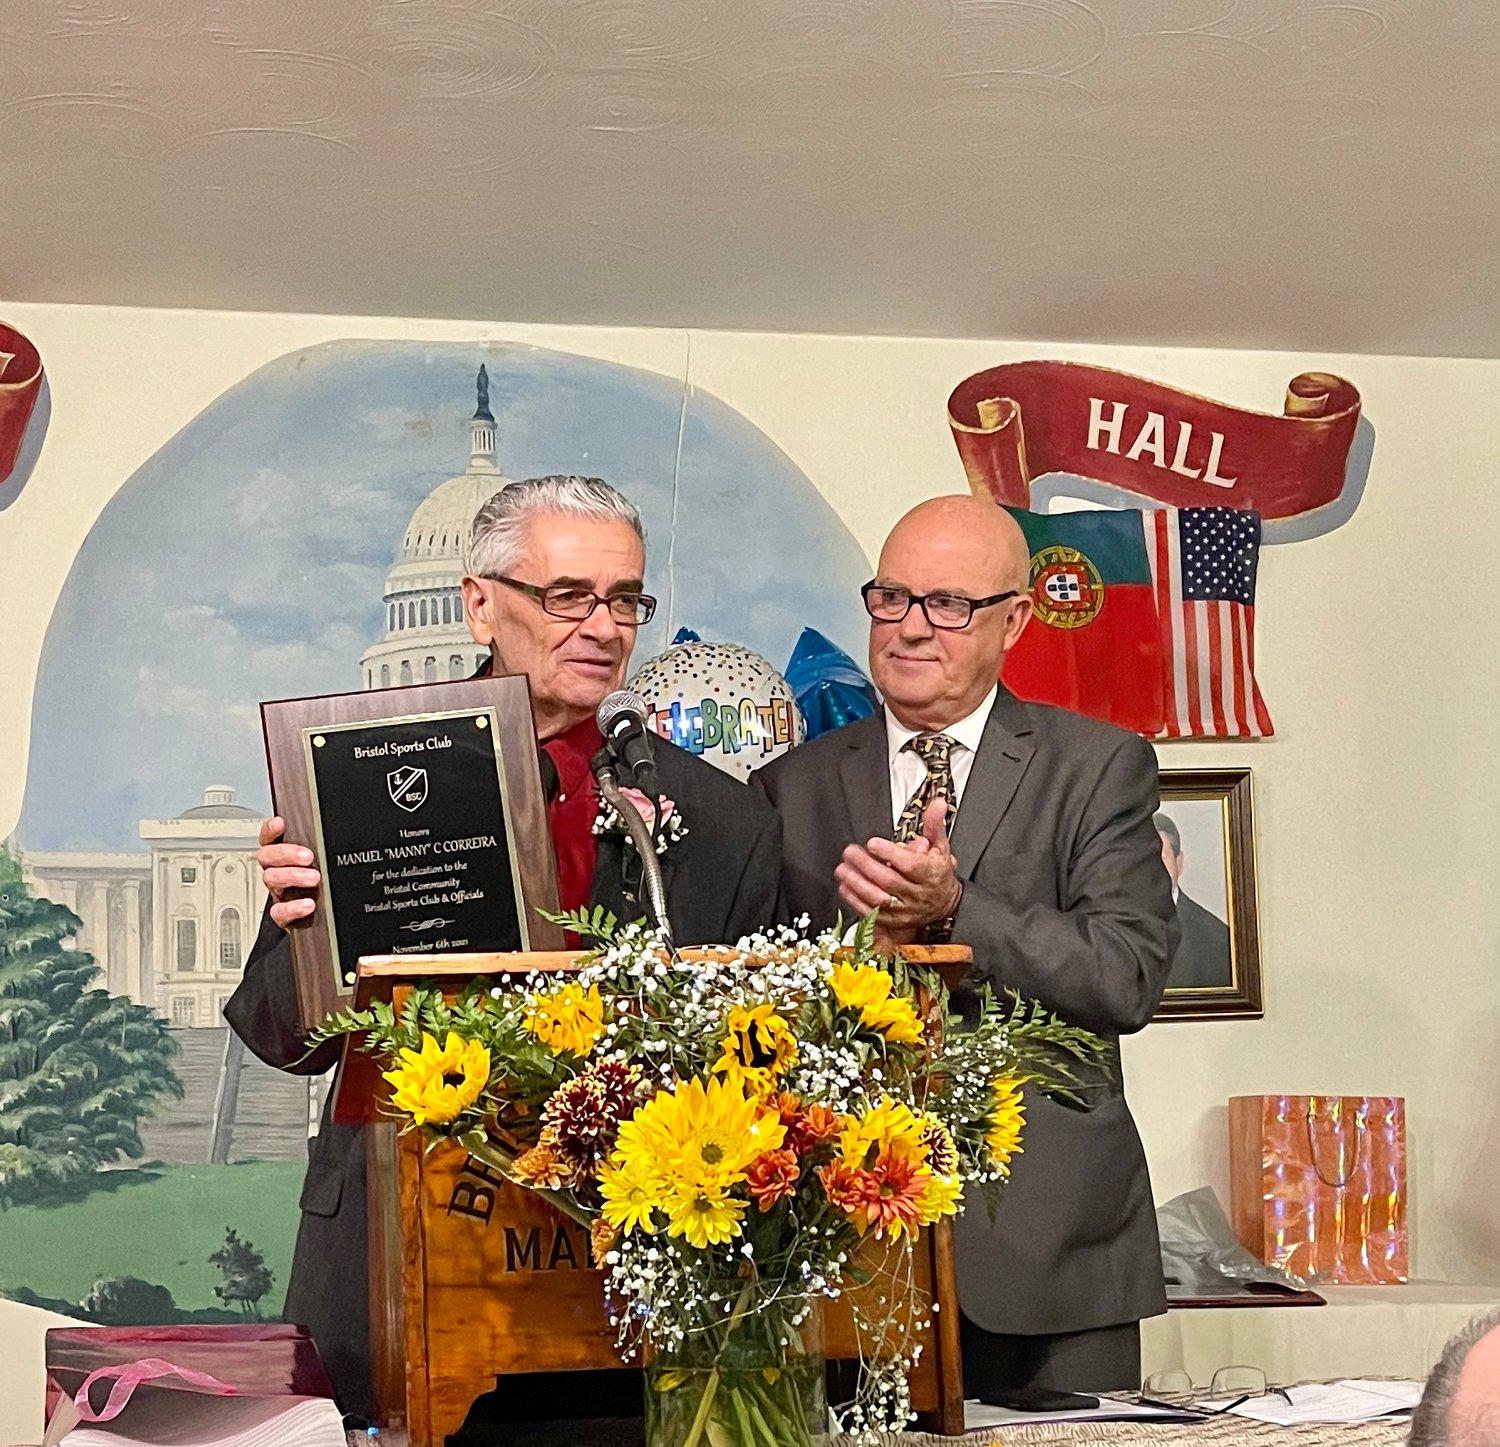 Manuel C. “Manny” Correira accepts the Man of the Year plaque from Bristol Sports President Elisio Castro, shortly before the unveiling of his portrait, which hangs proudly in the sports club’s banquet hall on Wood Street.